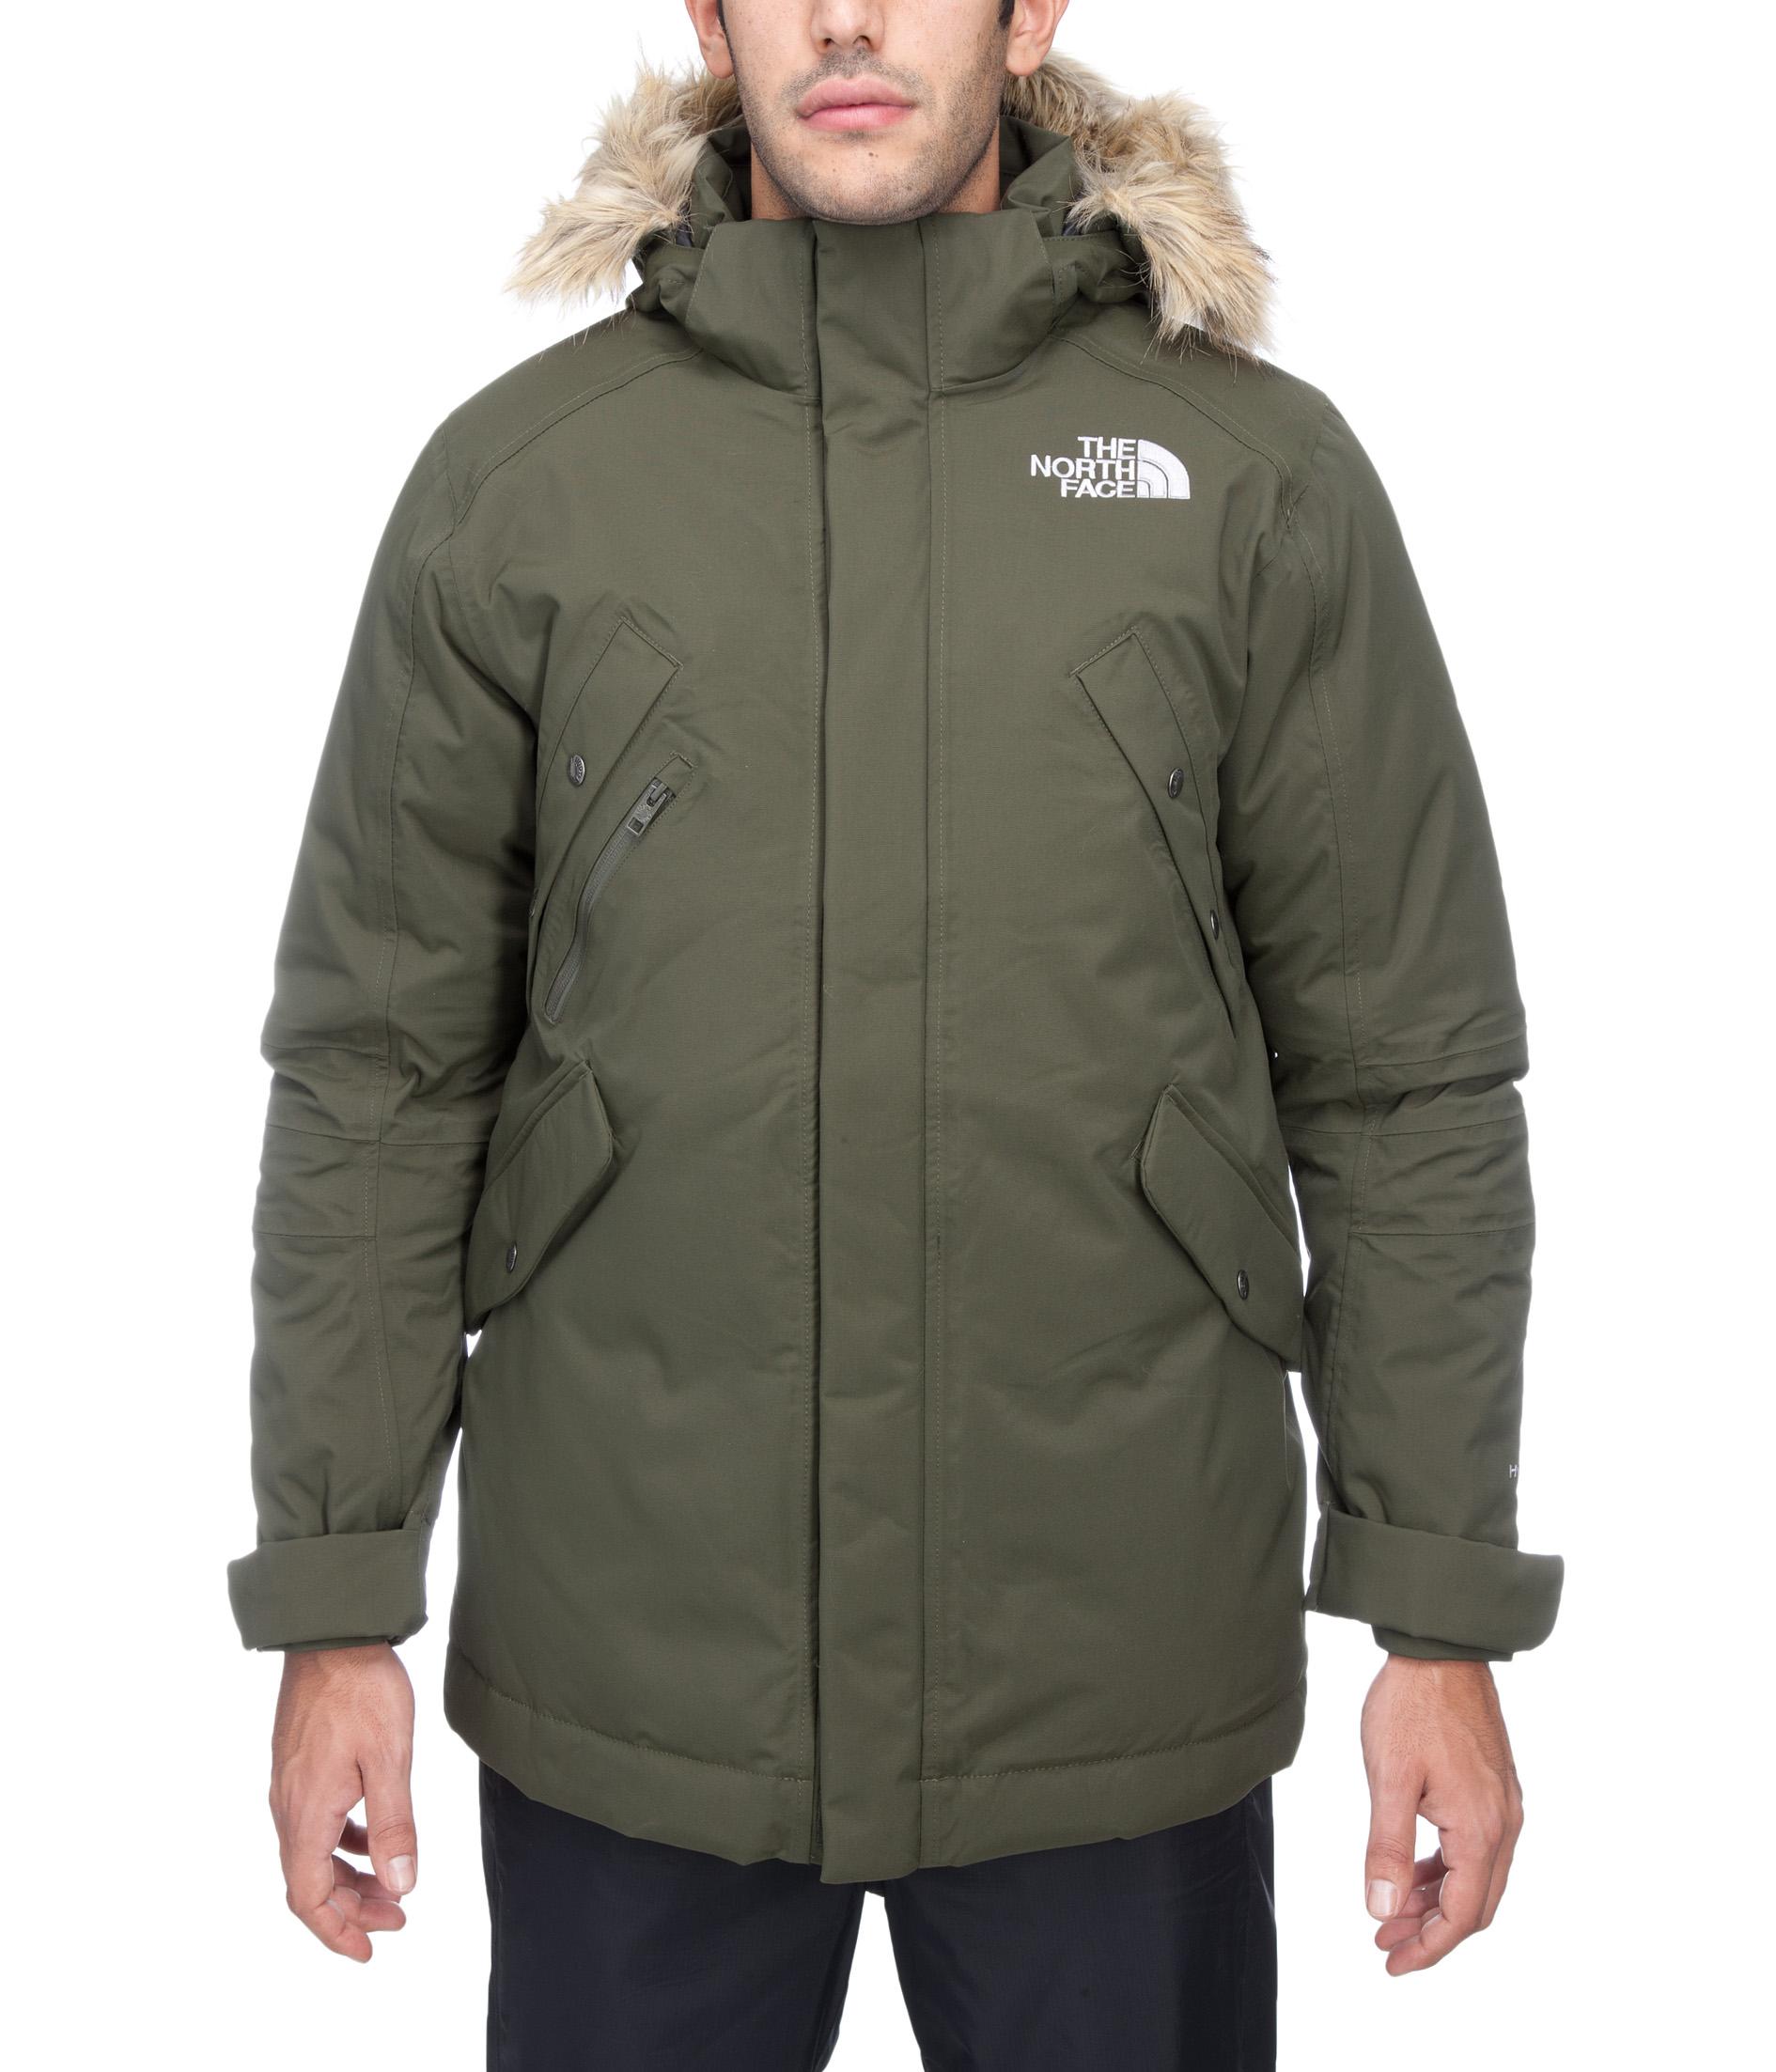 Foto The North Face Men's Stone Sentinel Insulated Jacket foto 52898